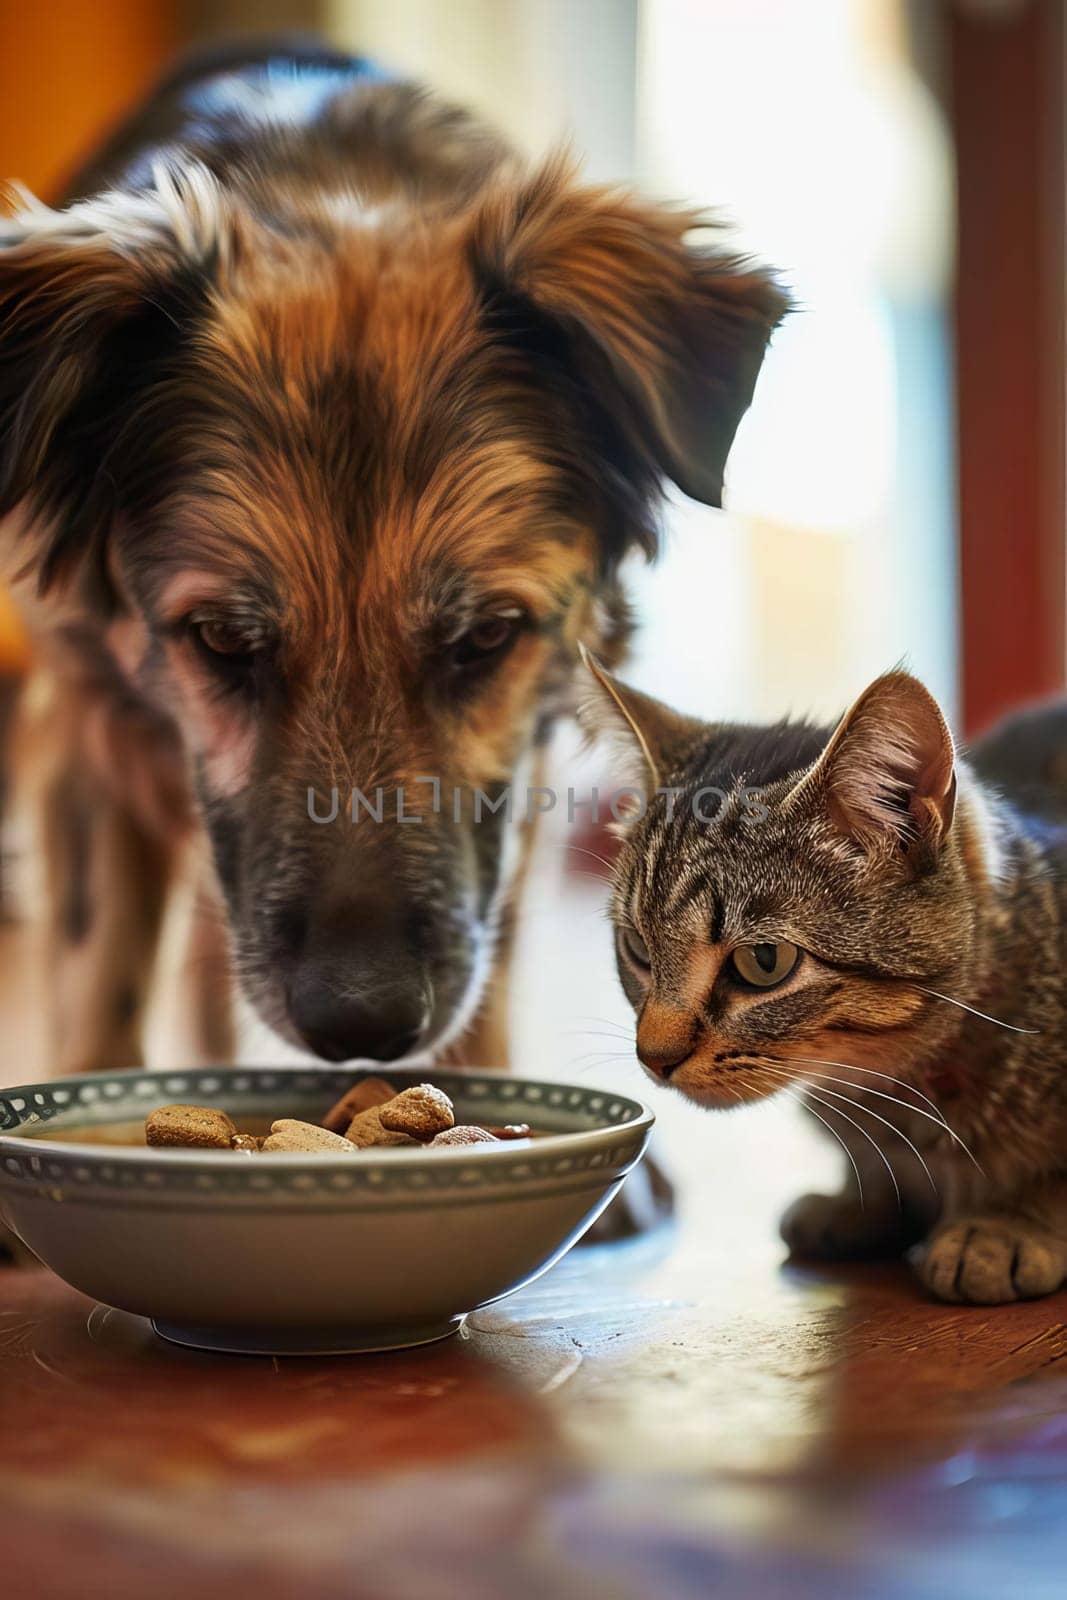 a dog and a cat eat from the same plate. Selective focus. by mila1784